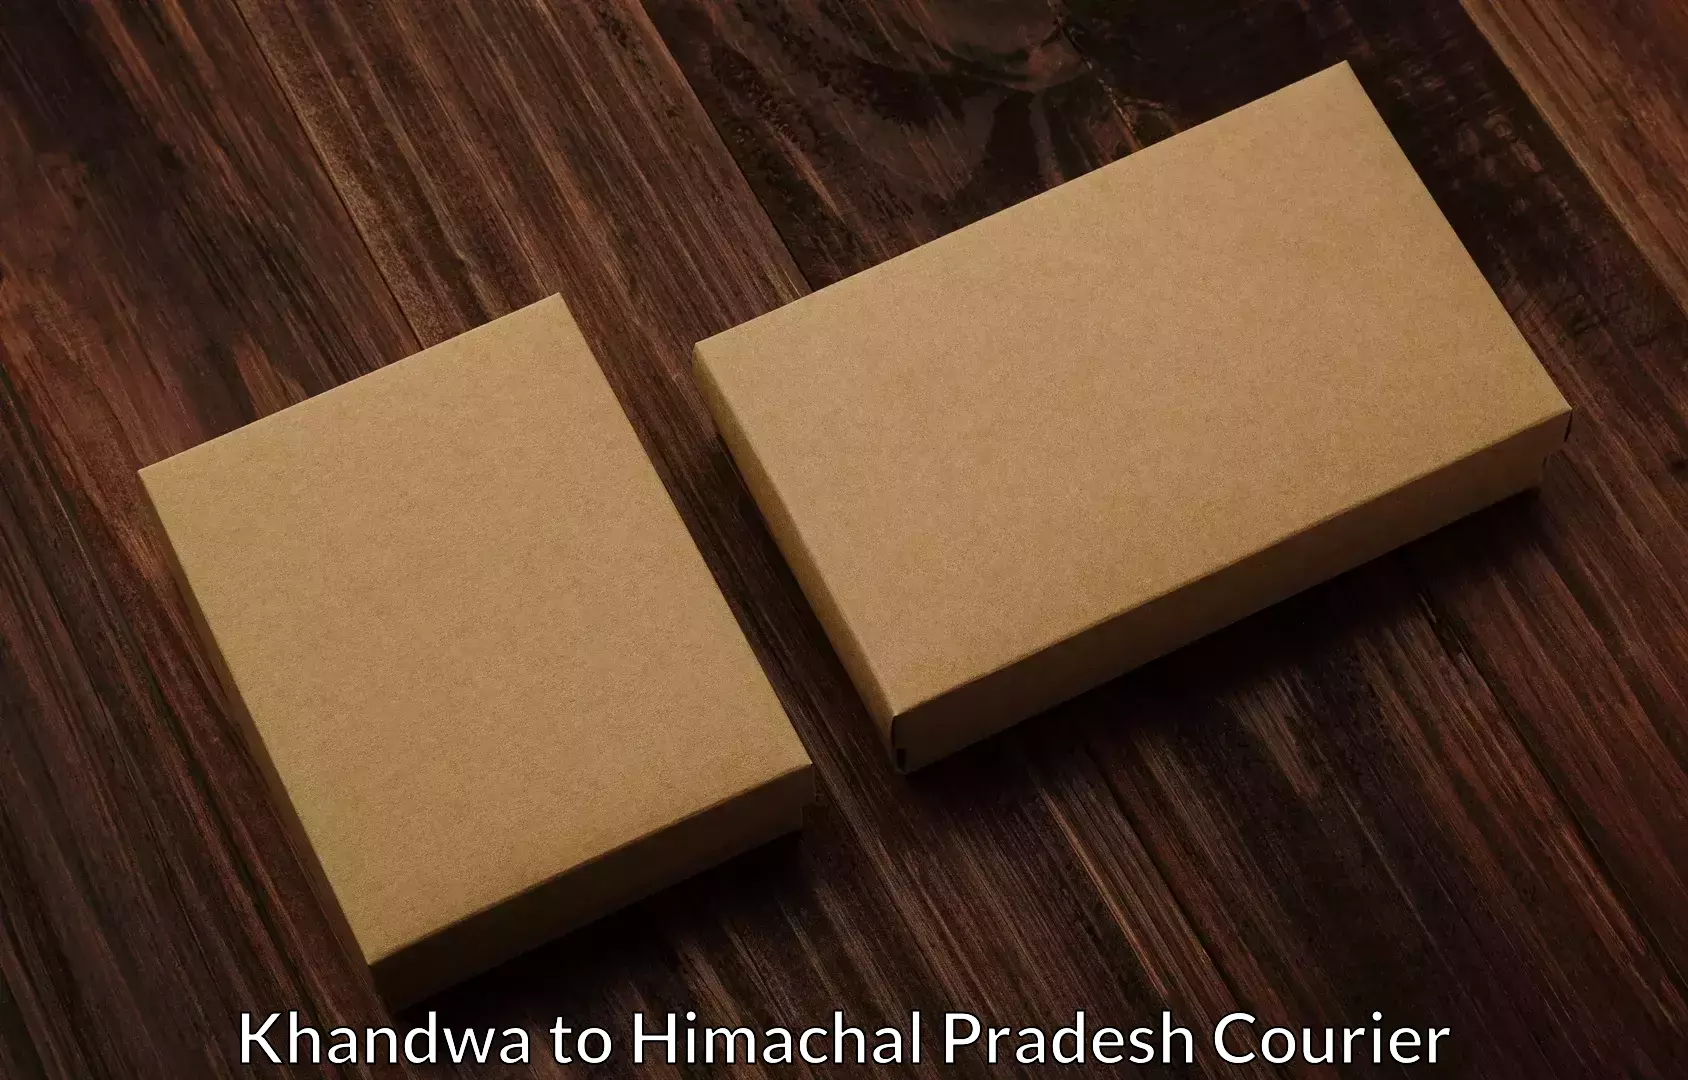 Home moving specialists Khandwa to Himachal Pradesh